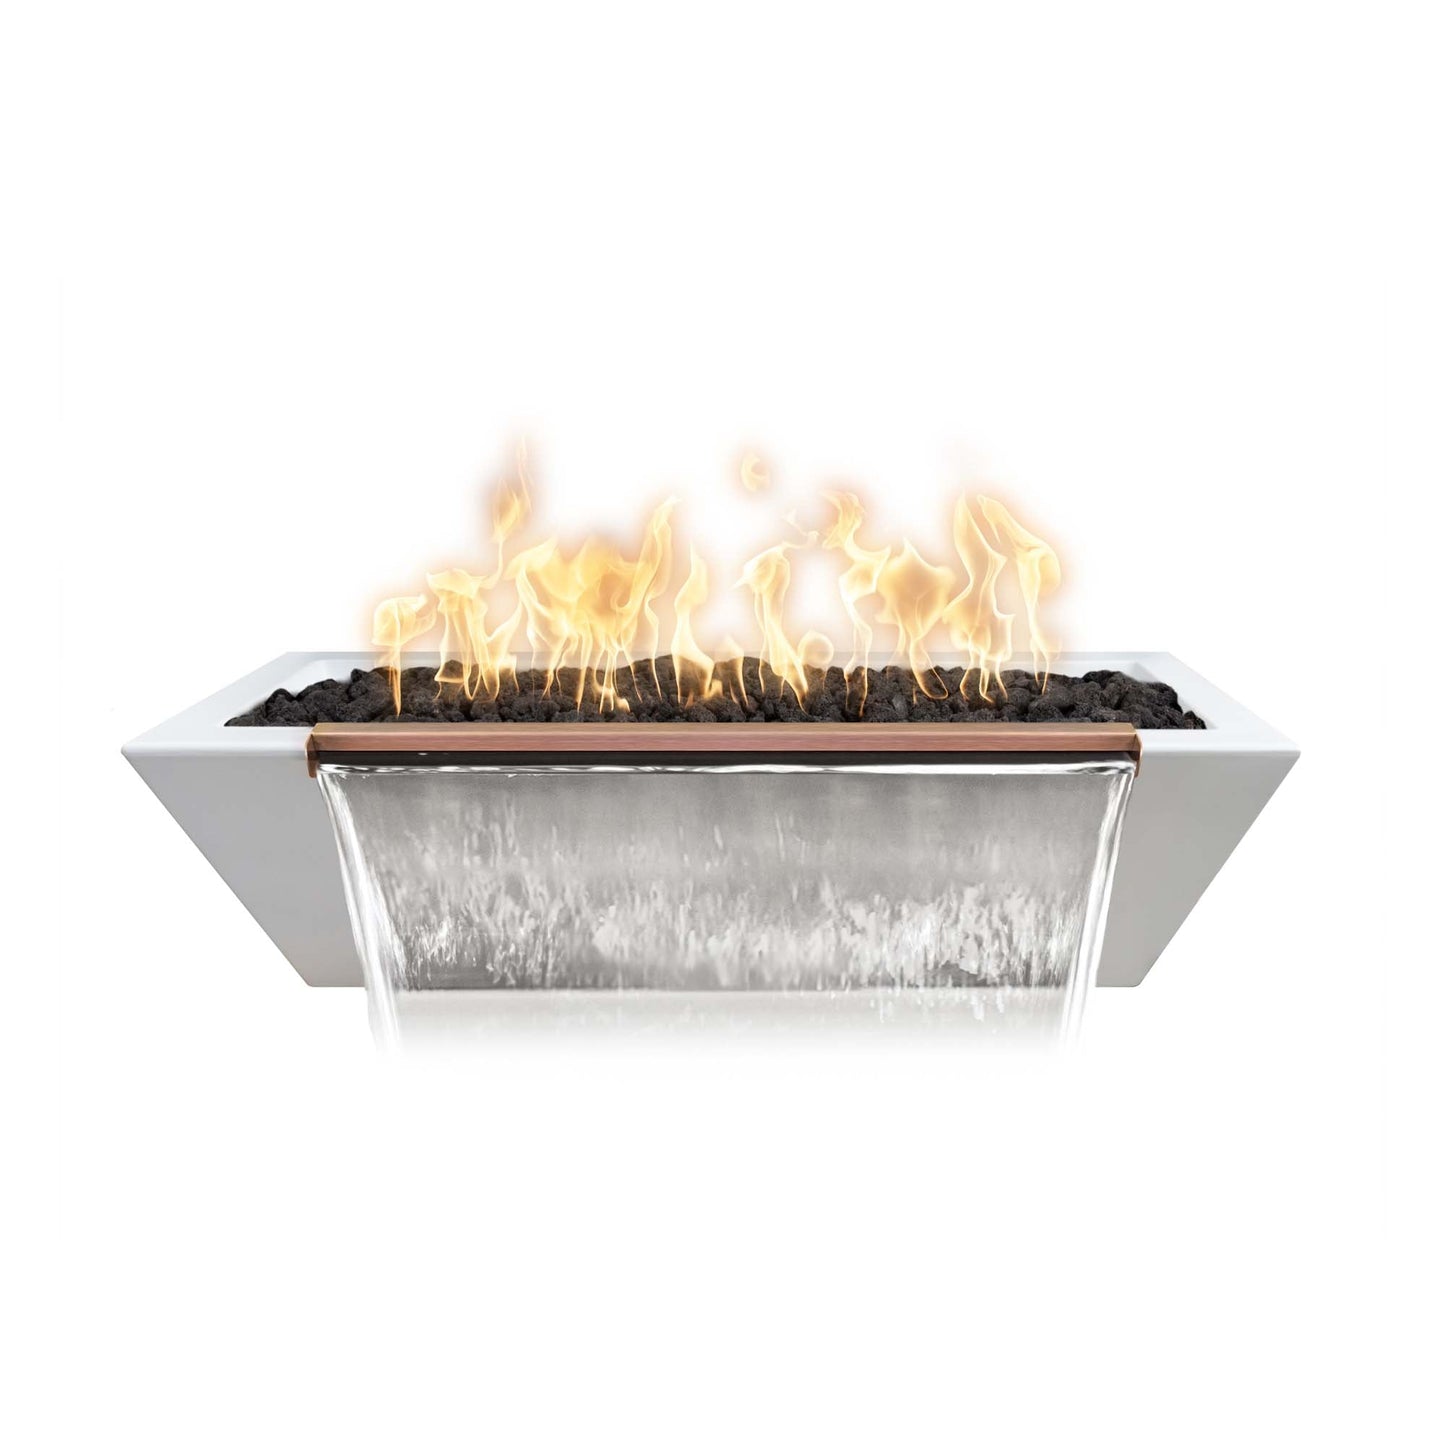 The Outdoor Plus Linear Maya 72" Rustic Coffee GFRC Concrete Liquid Propane Fire & Water Bowl with Match Lit with Flame Sense Ignition